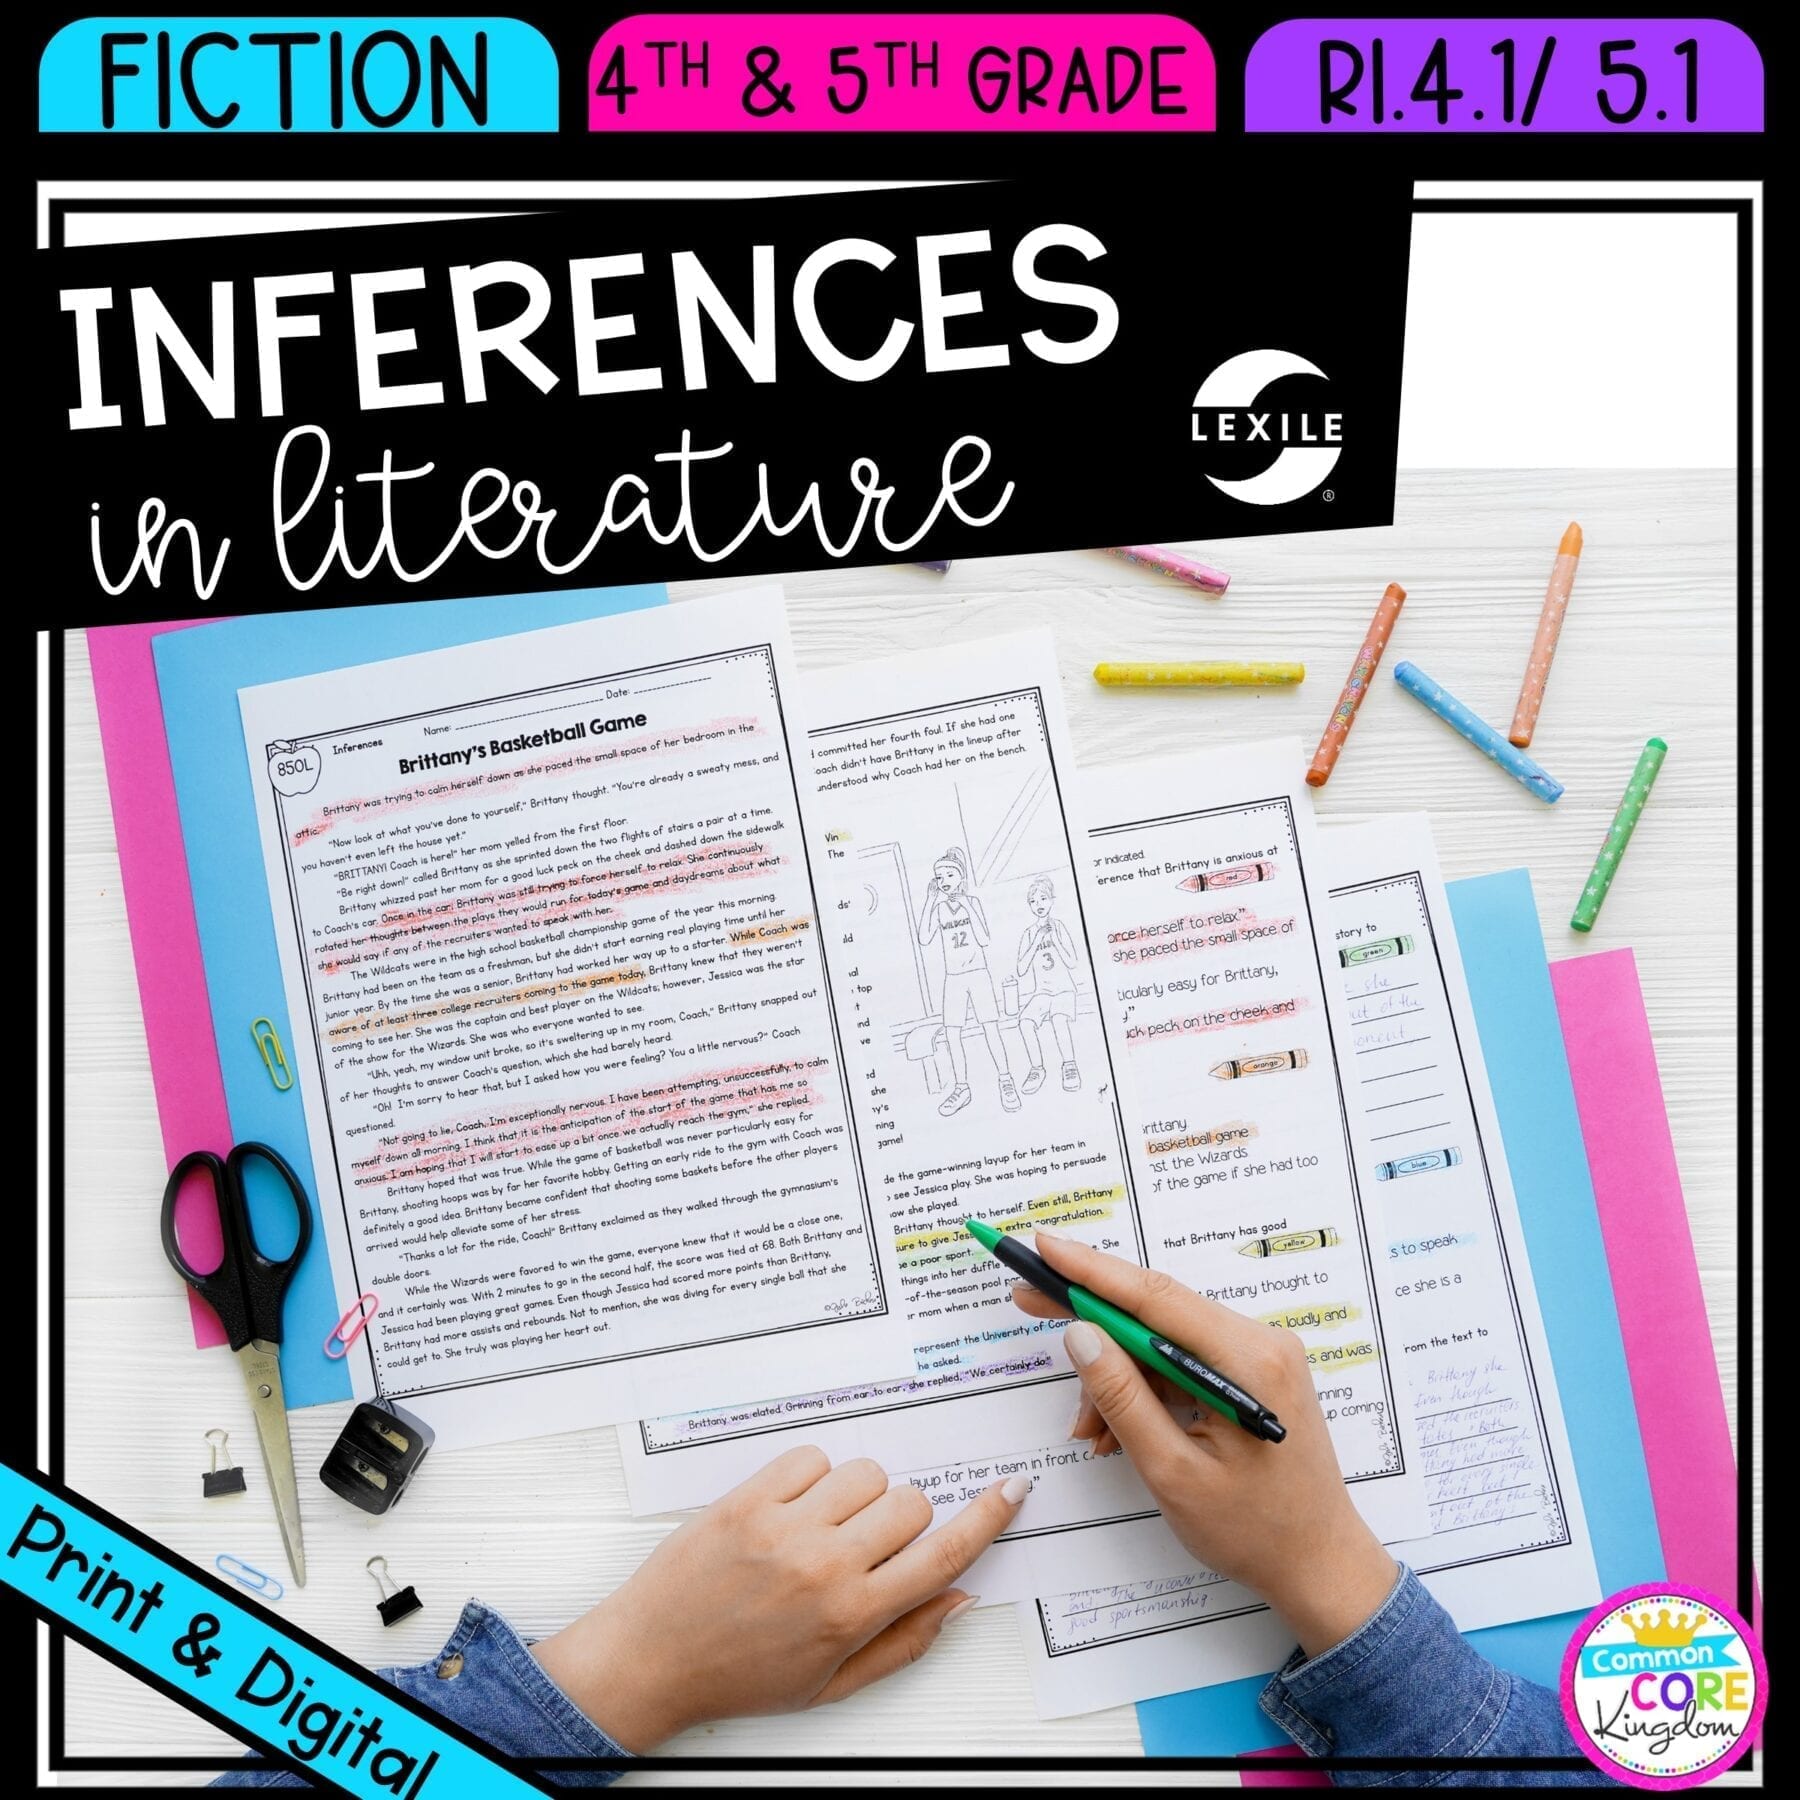 Inferences in Literature for 4th & 5th grade cover showing printable and digital worksheets